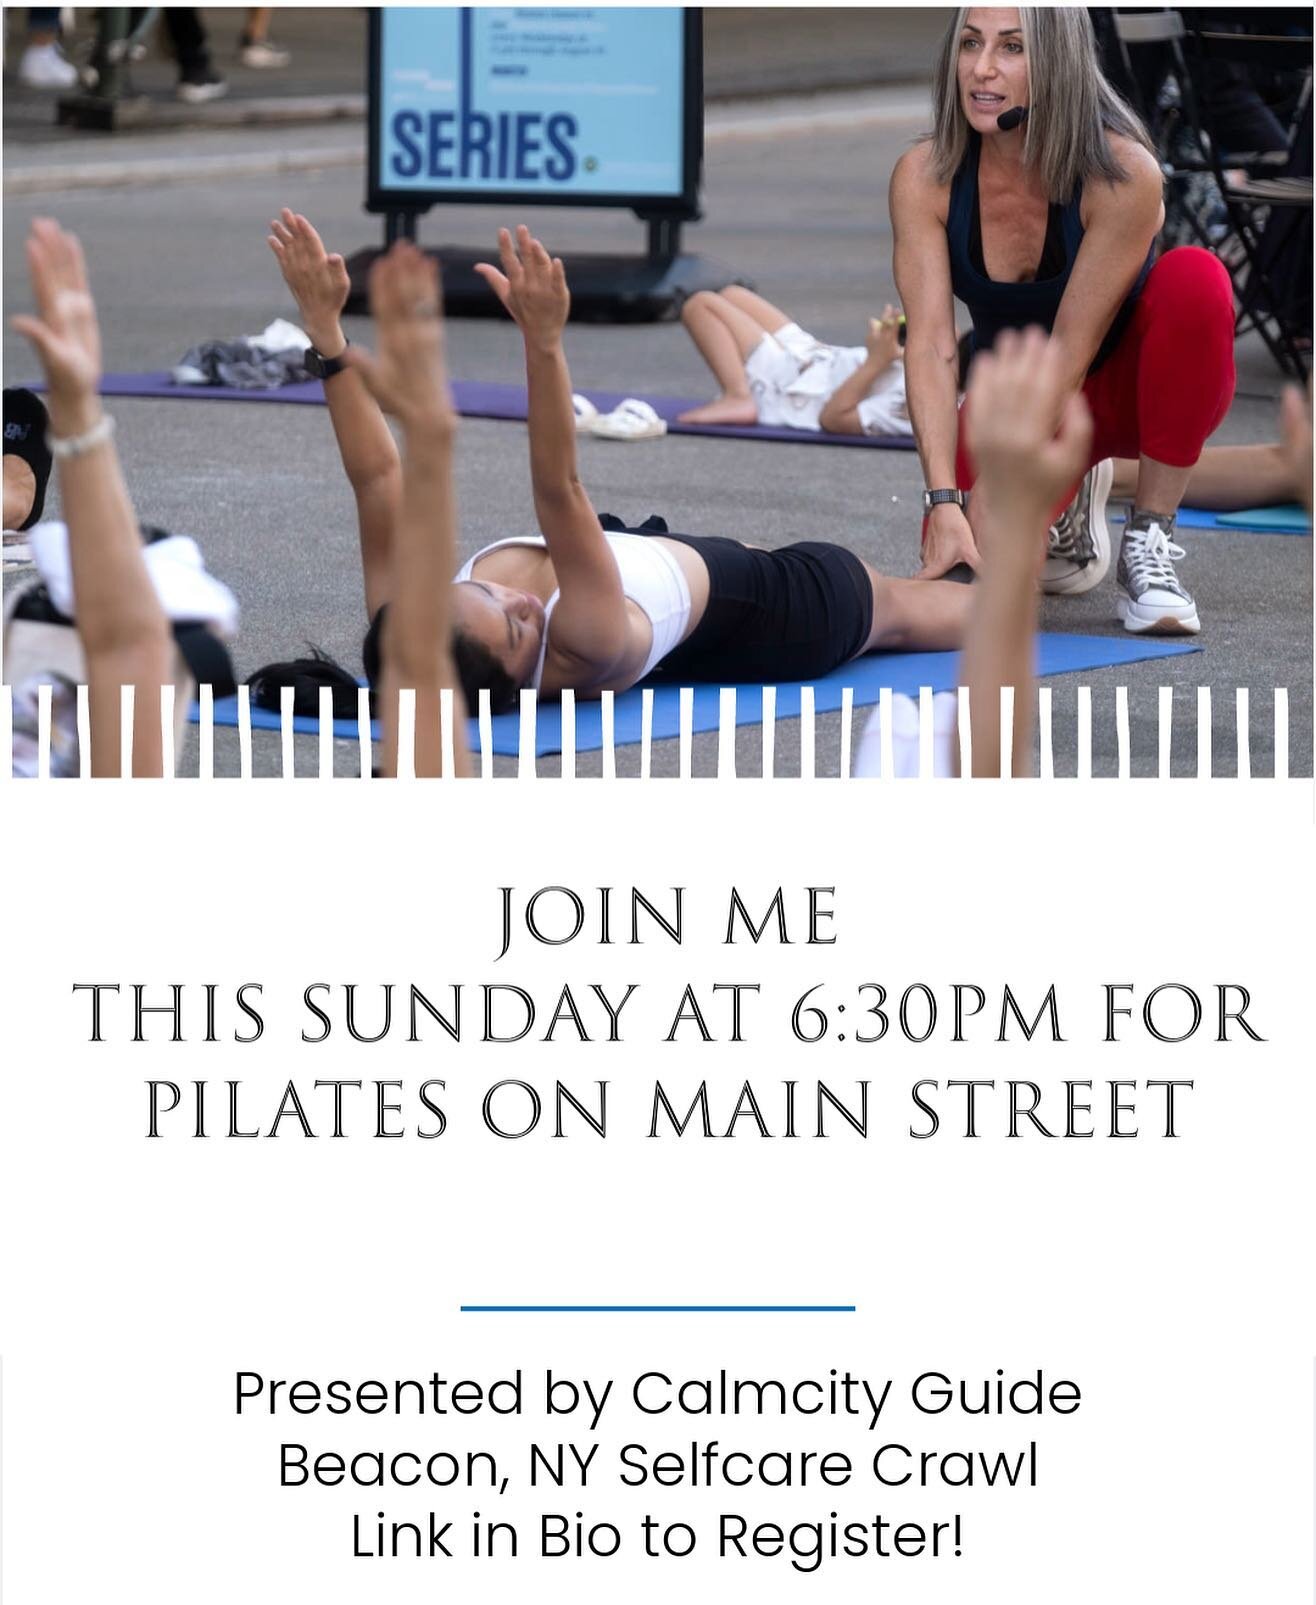 This Sunday Beacon has its first selfcare CalmGuide crawl. All up and down Main St. join small businesses specializing in your wellness.

This includes lots of free fitness classes including a Pilates mat class with me this Sunday 6:40pm at the Pop-U